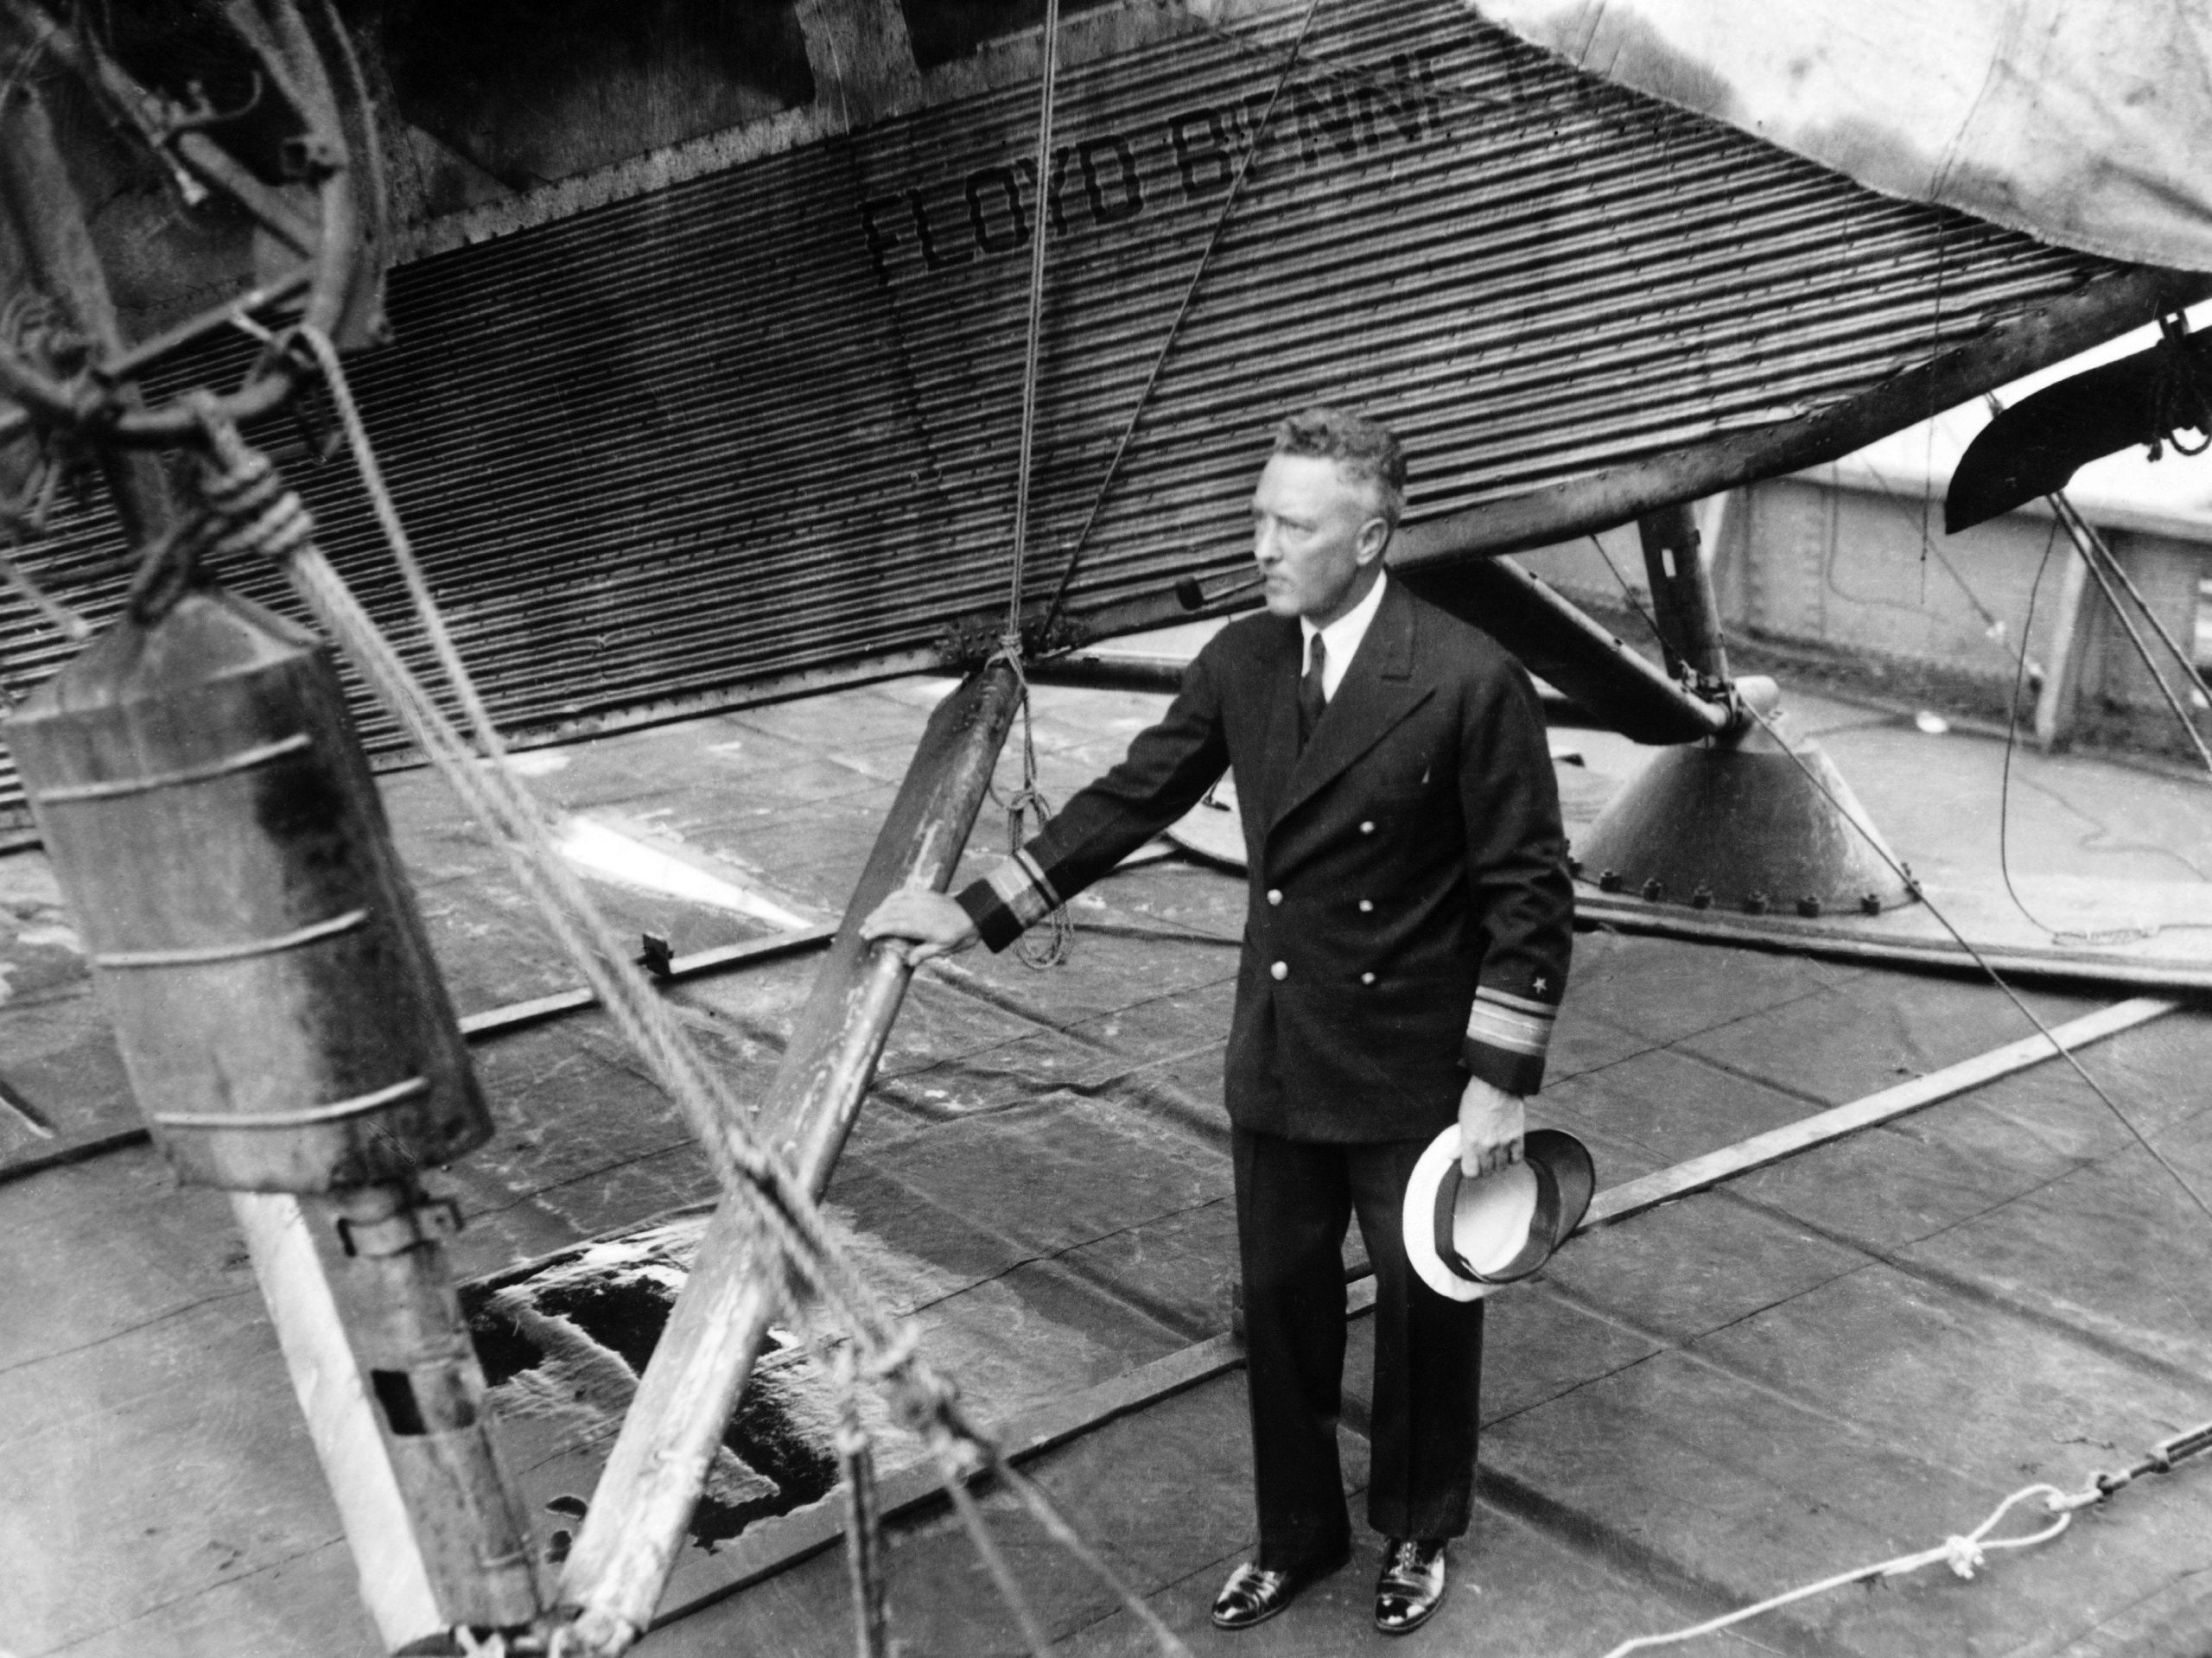 Richard Byrd posing next to the plane he used on his expedition to the South Pole.